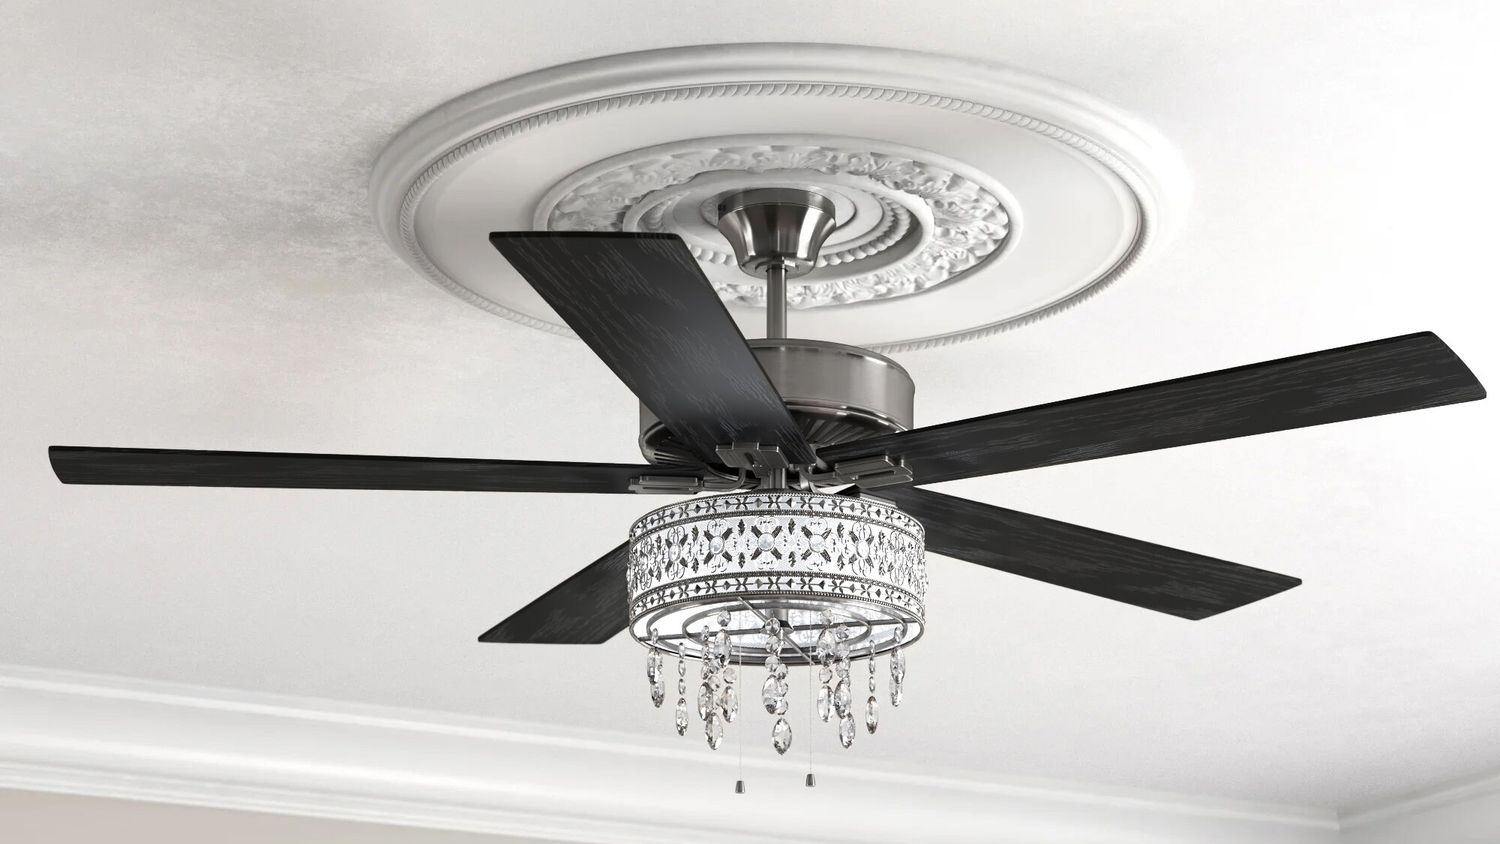 The 10 Best Ceiling Fans In 2021 According To Reviews Real Simple - What Is The Best Ceiling Fan For A Garage